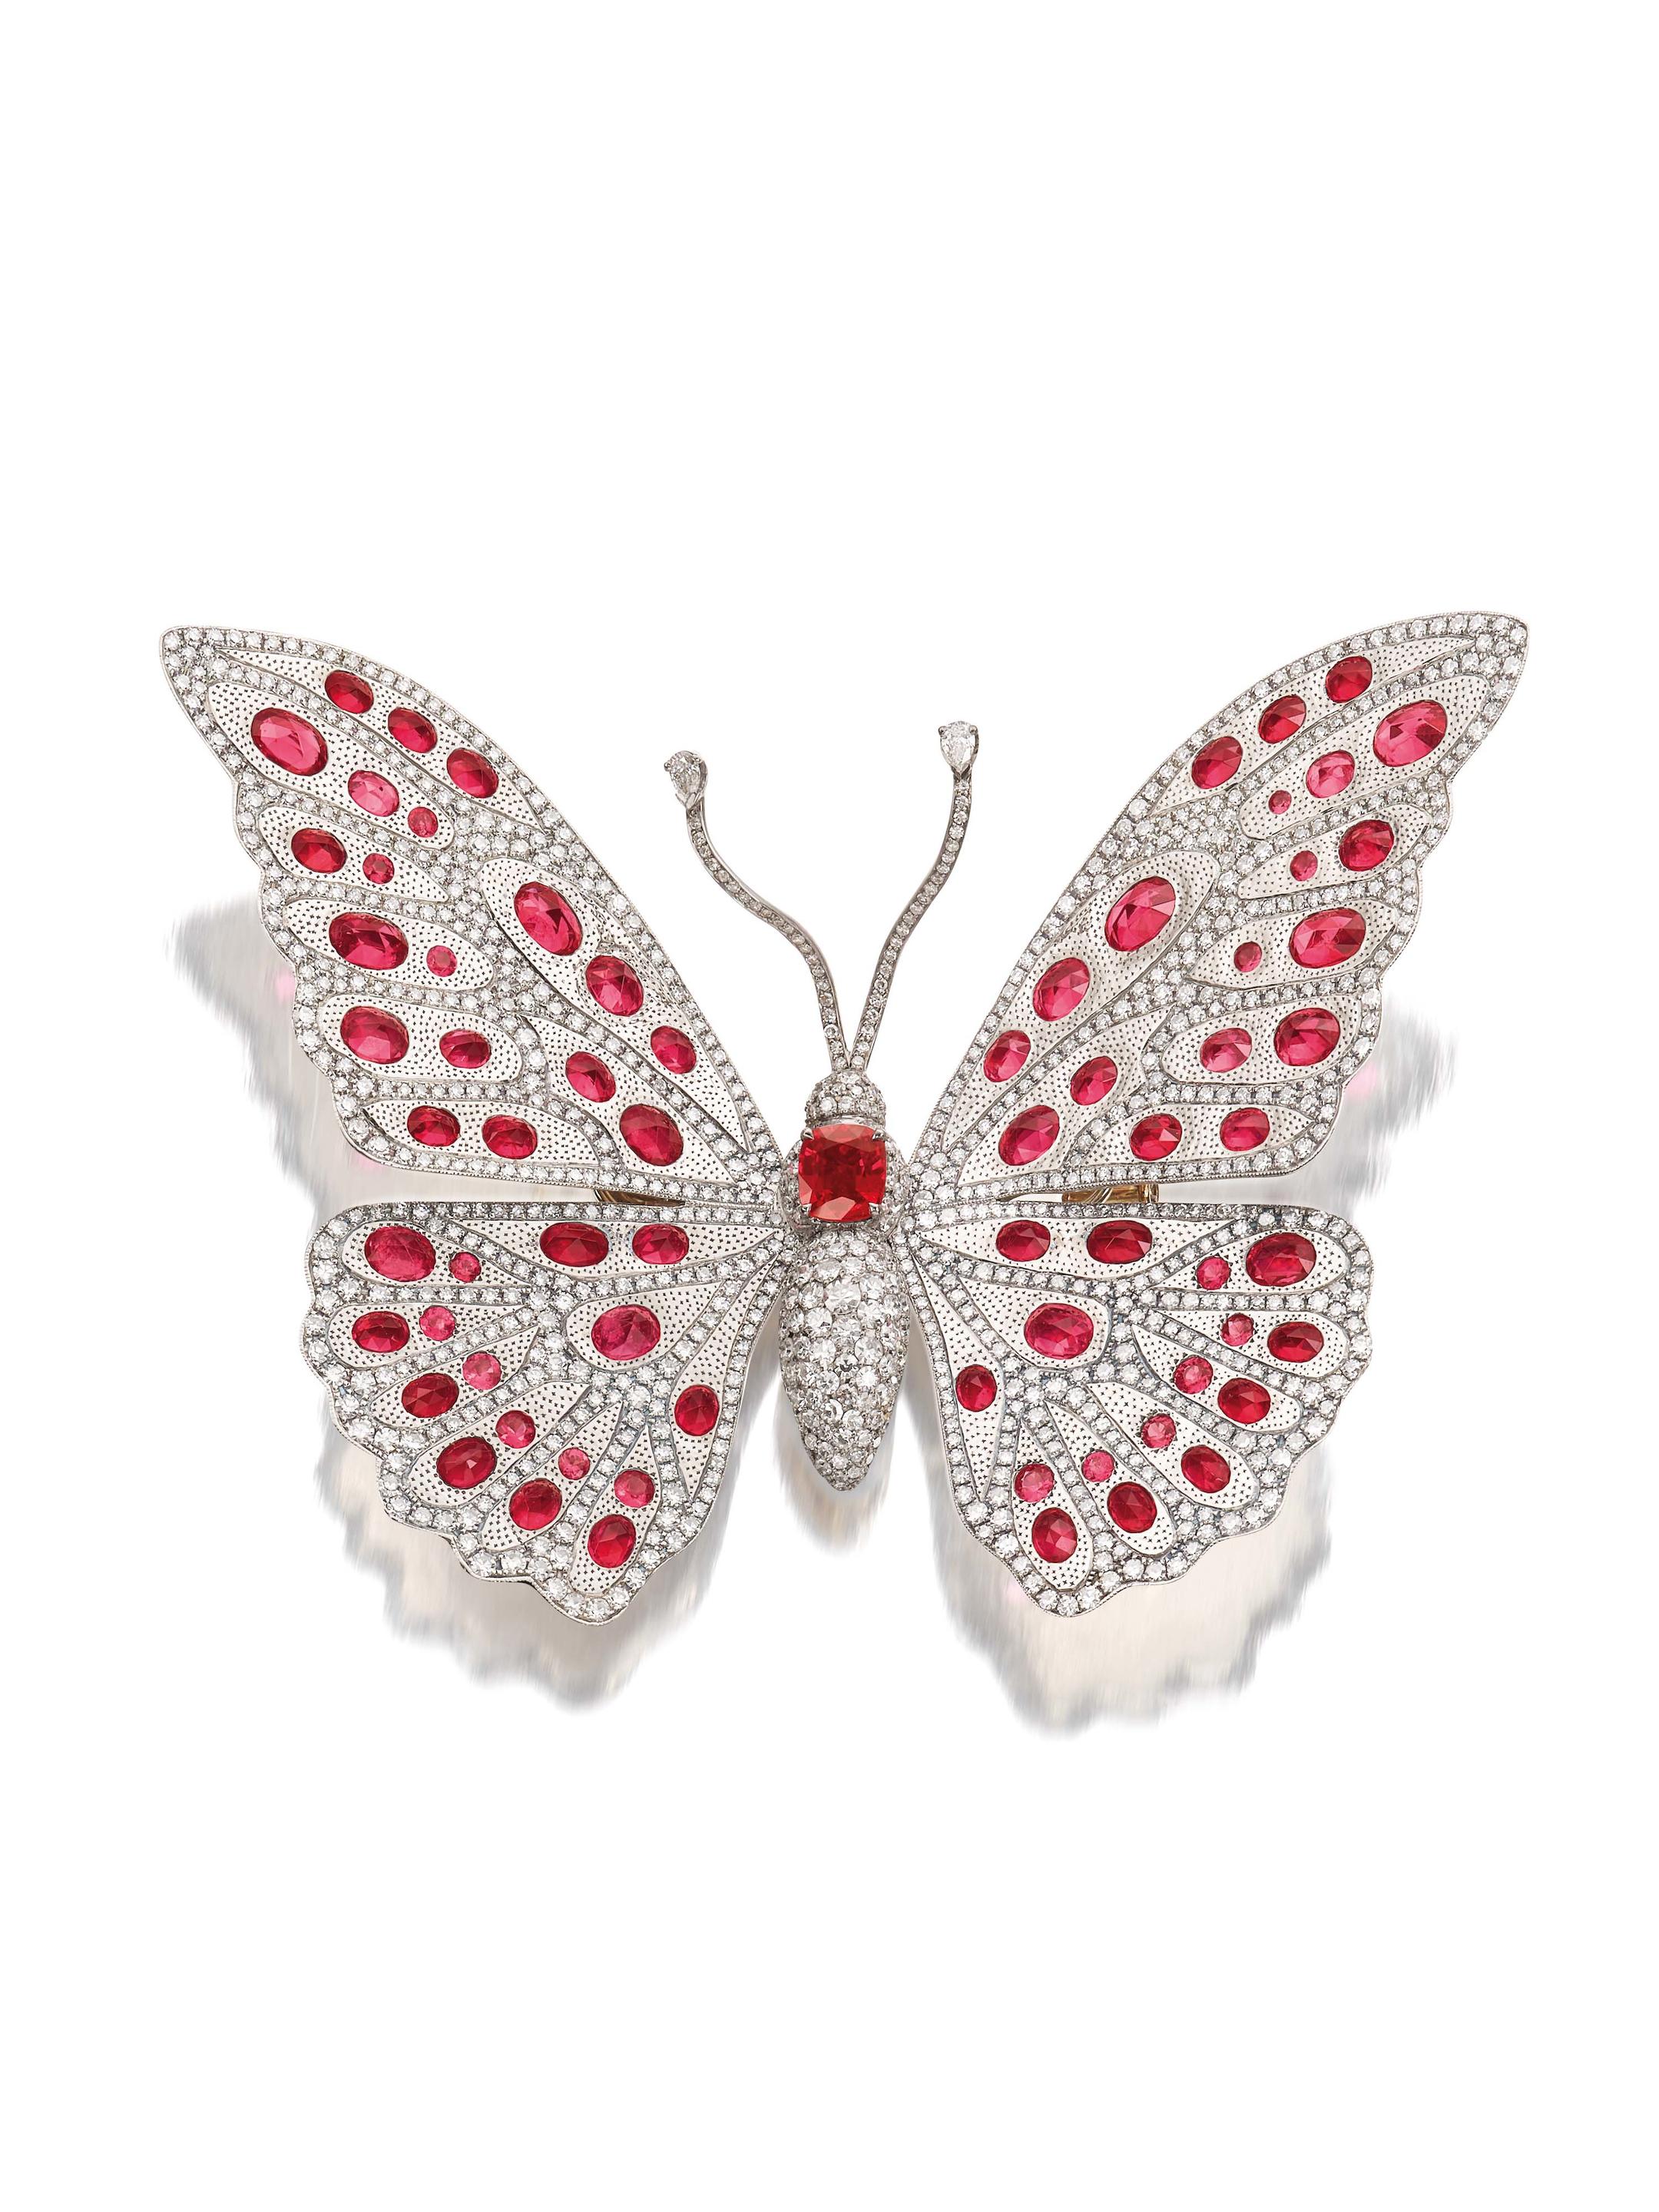 NISAN: A TITANIUM, SPINEL AND DIAMOND 'BUTTERFLY' BROOCH